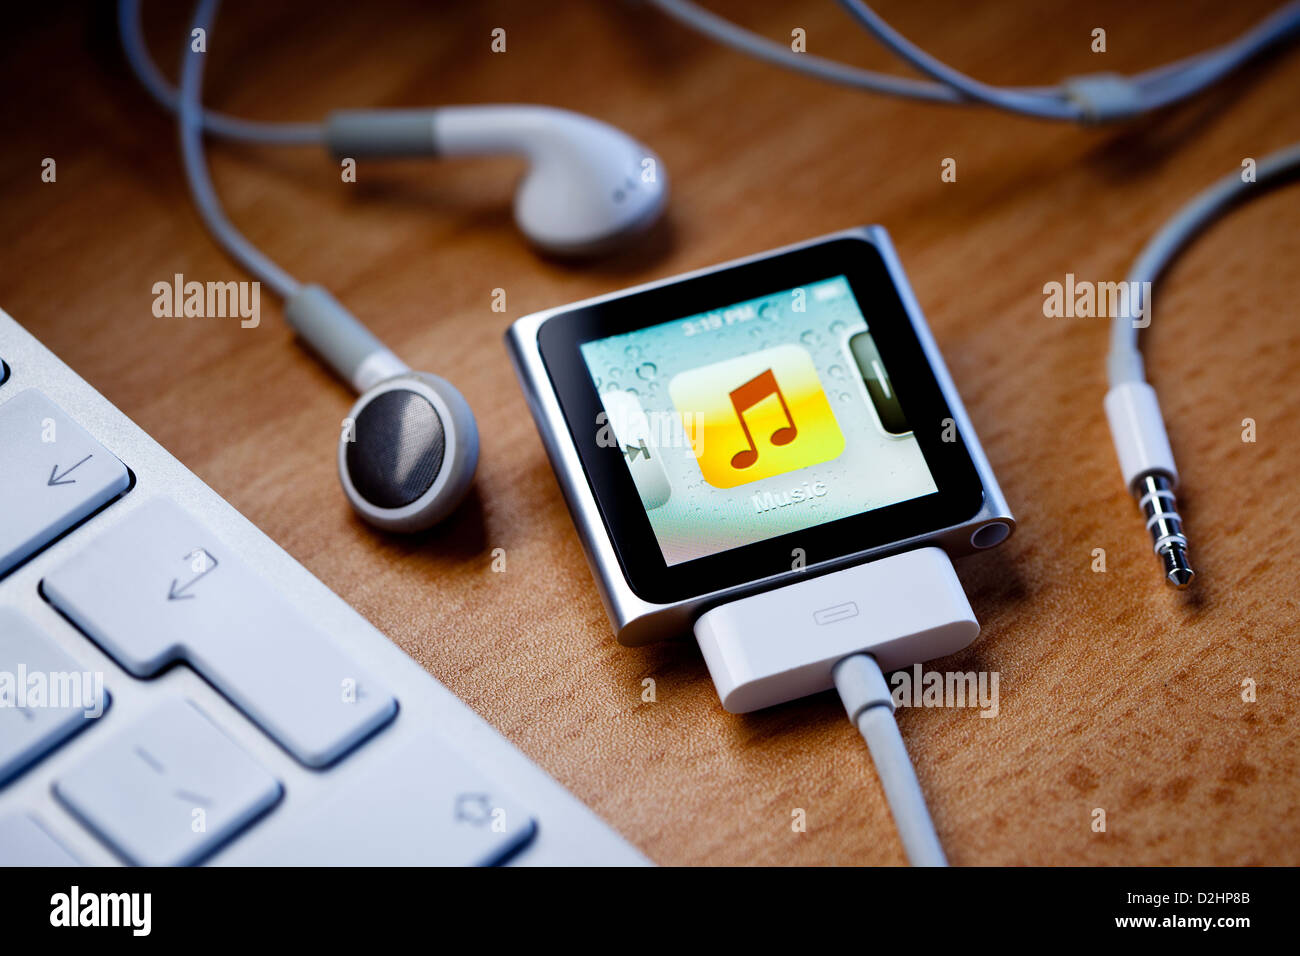 iPod Nano with a cable attached, sits on a desk next to Apple earbud headphones and a computer keyboard. Stock Photo